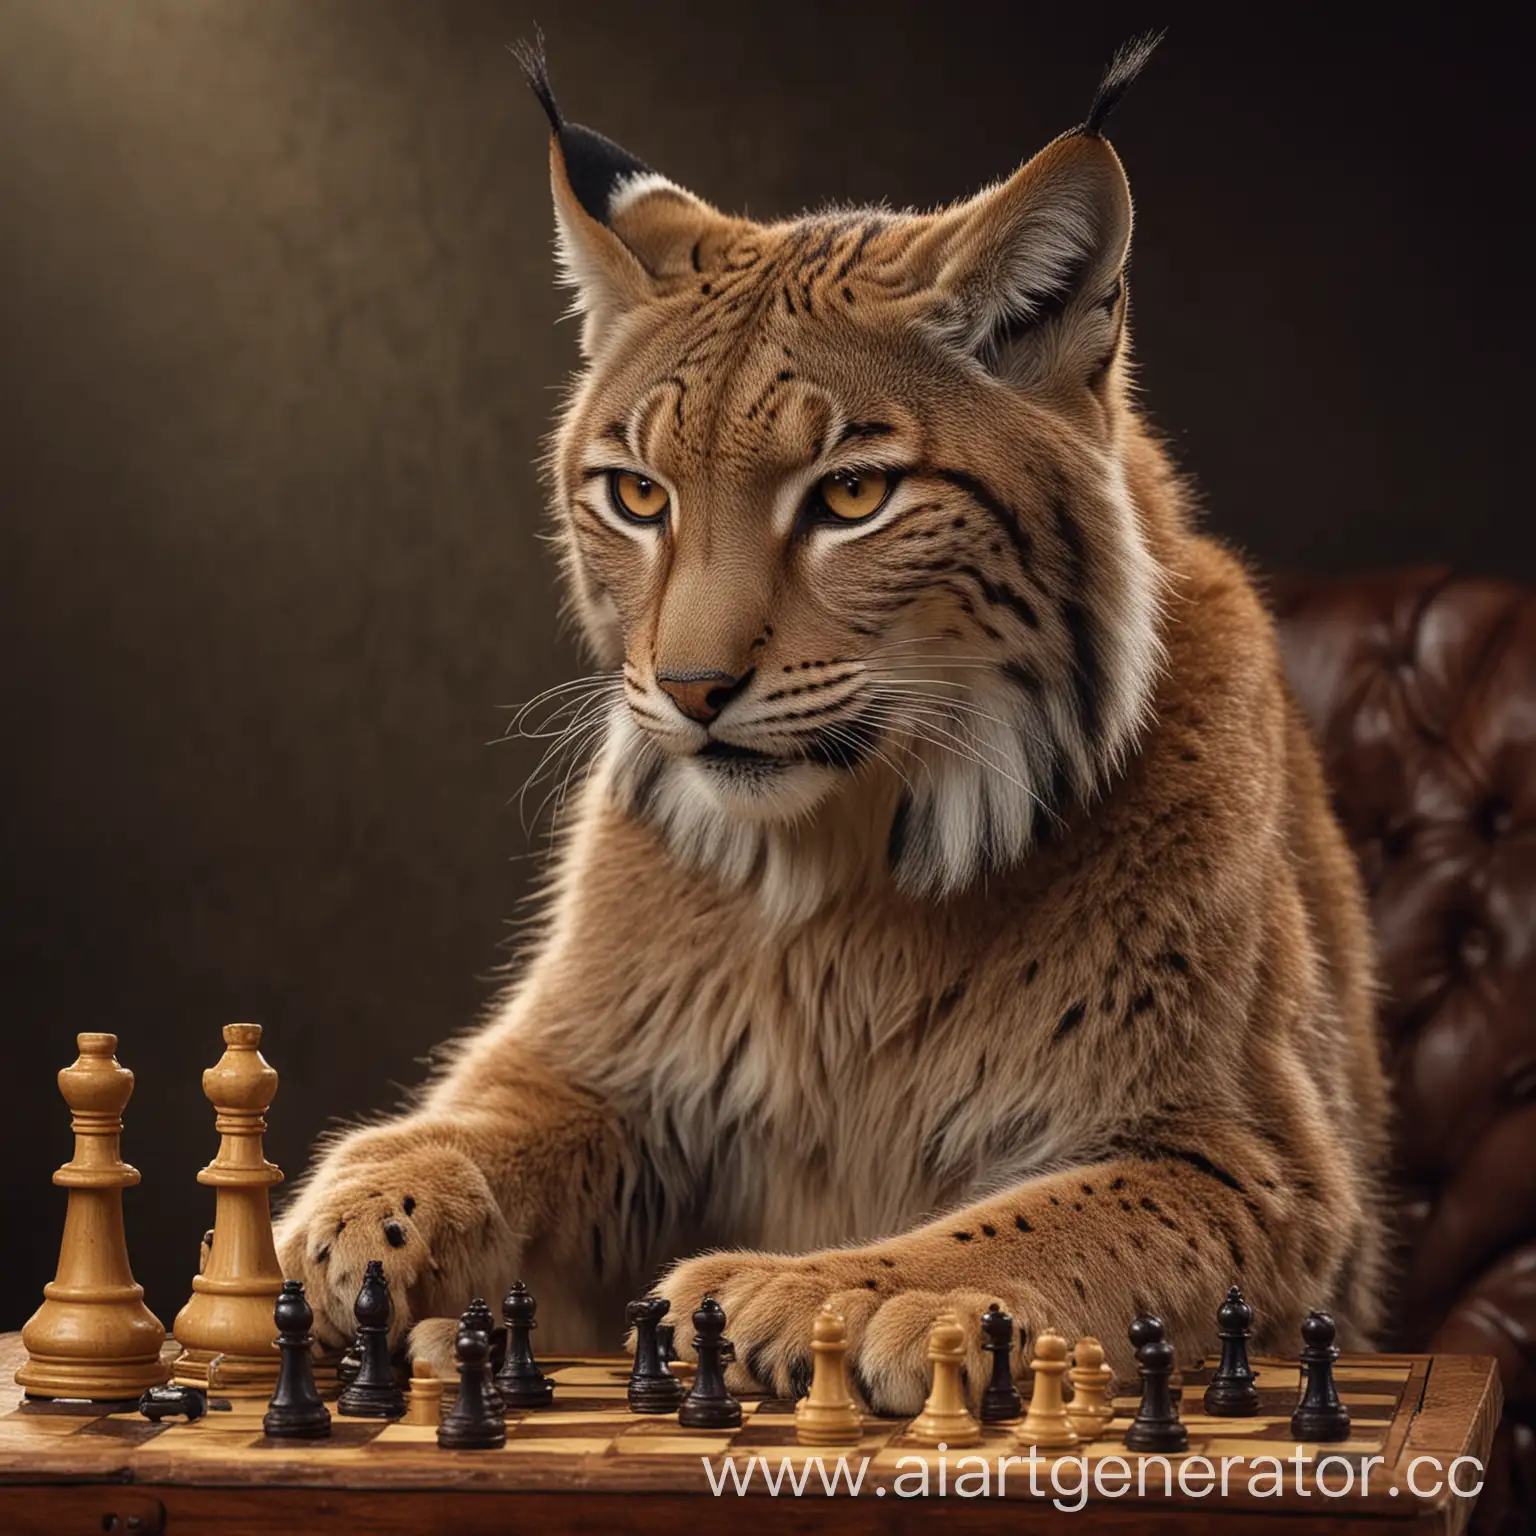 Lynx-Drinking-Scotch-Whisky-and-Playing-Chess-A-Clever-and-Sophisticated-Feline-Recreation